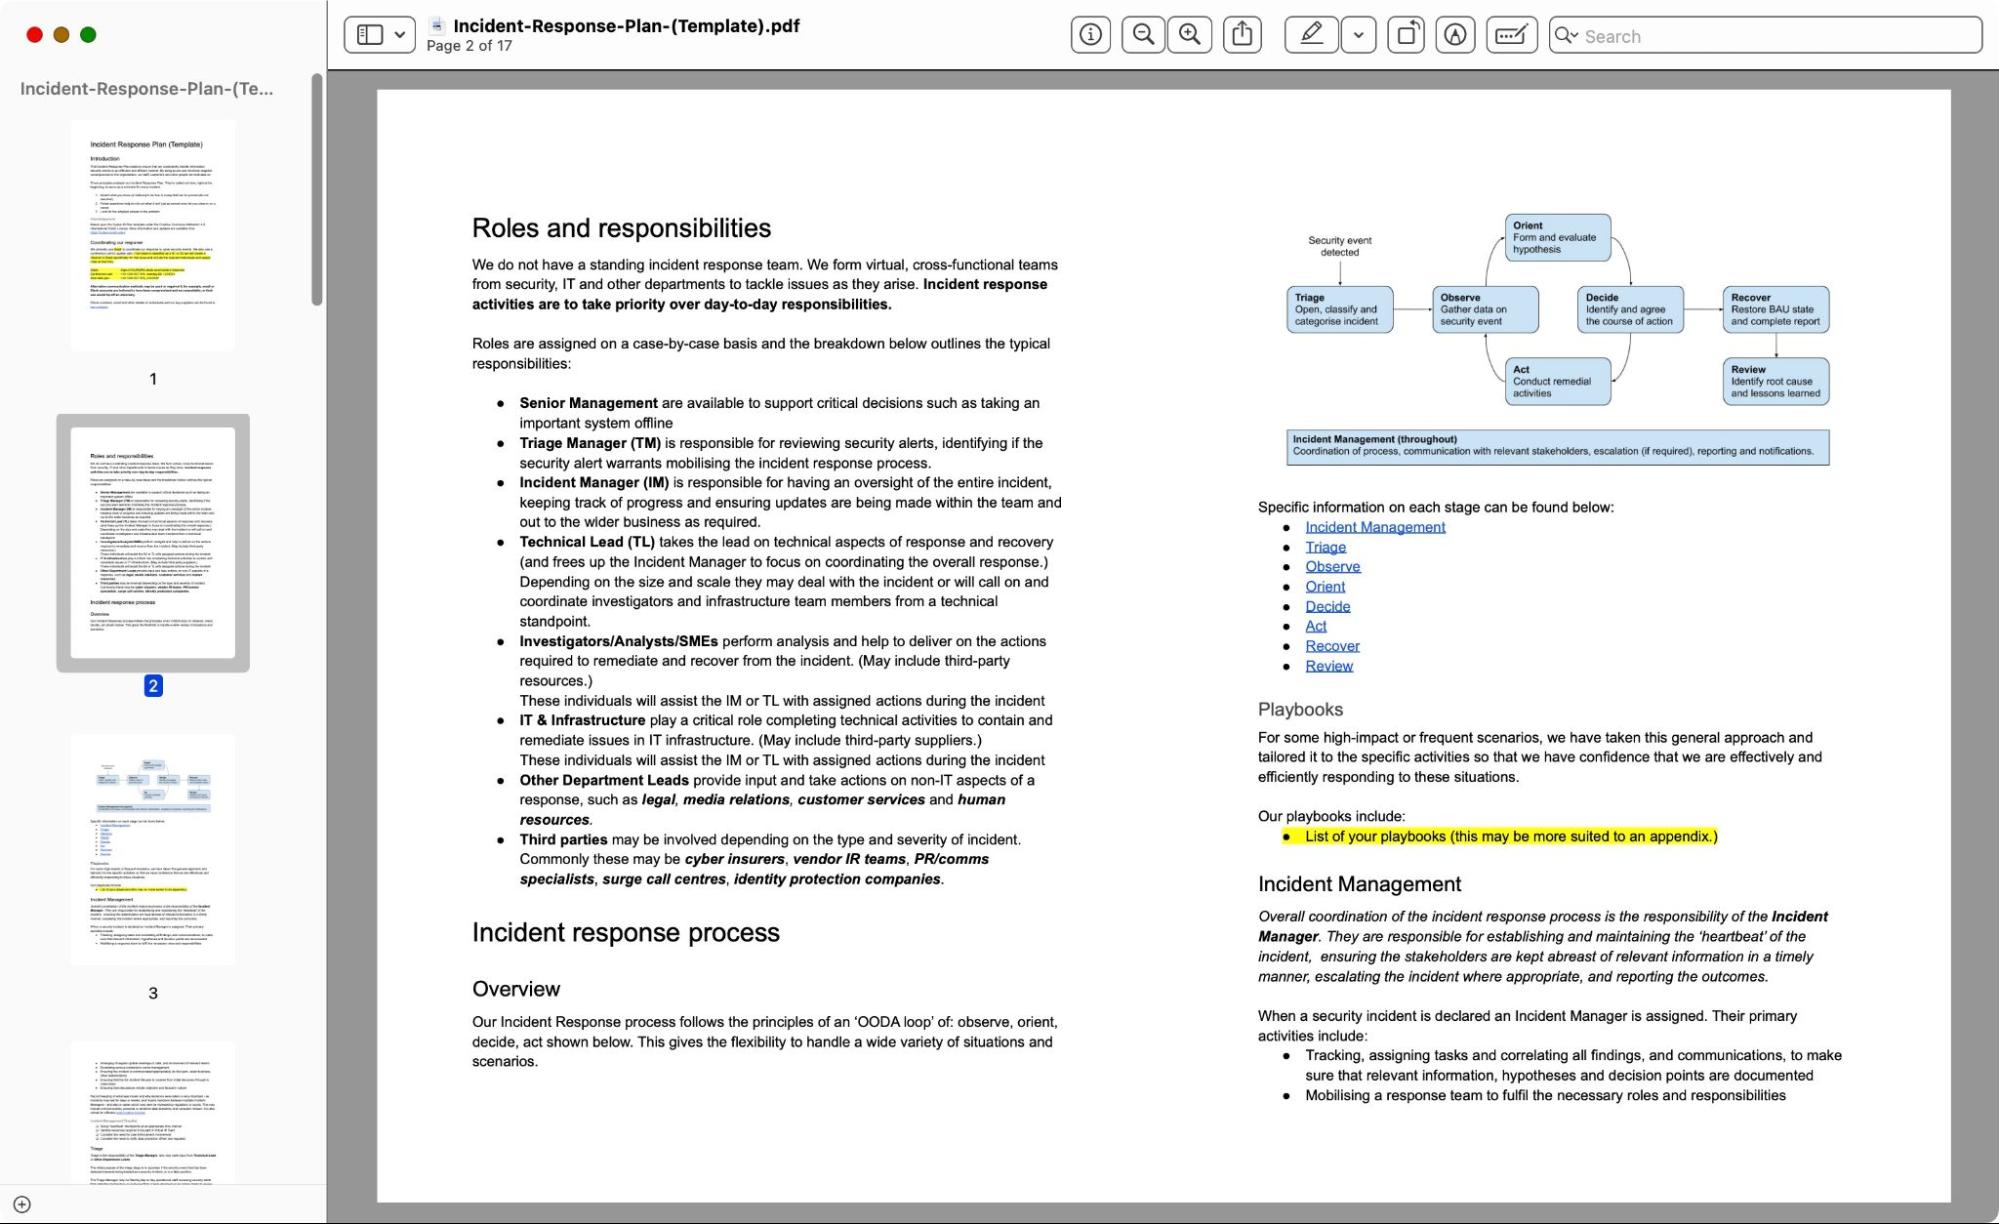 screenshot of incident response playbook document which can be downloaded using link below